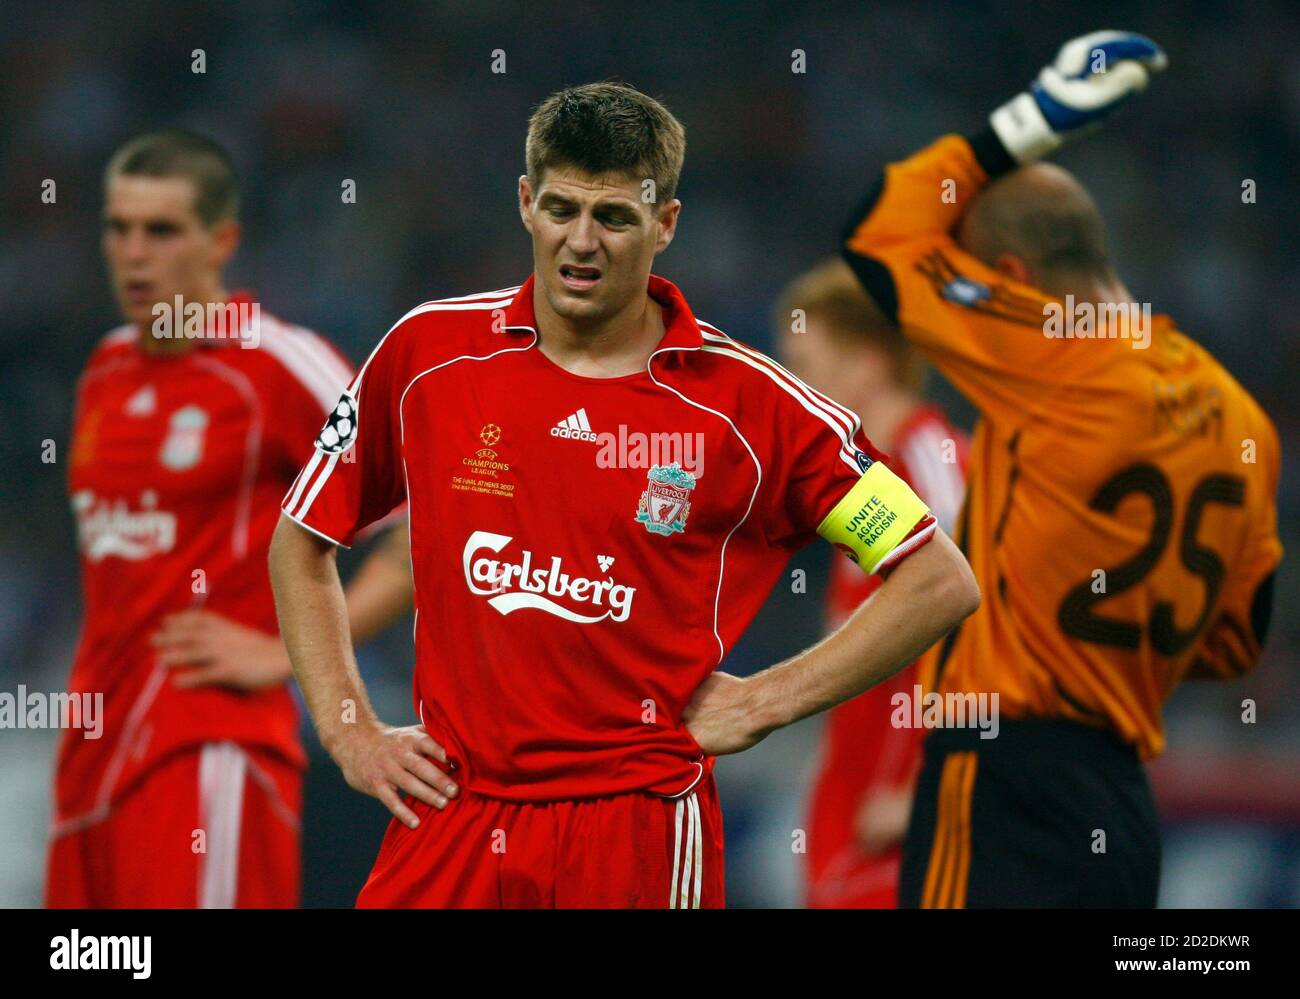 Liverpool's captain Steven Gerrard reacts during their Champions League  final soccer match against AC Milan in Athens, May 23, 2007. REUTERS/Kai  Pfaffenbach (GREECE Stock Photo - Alamy